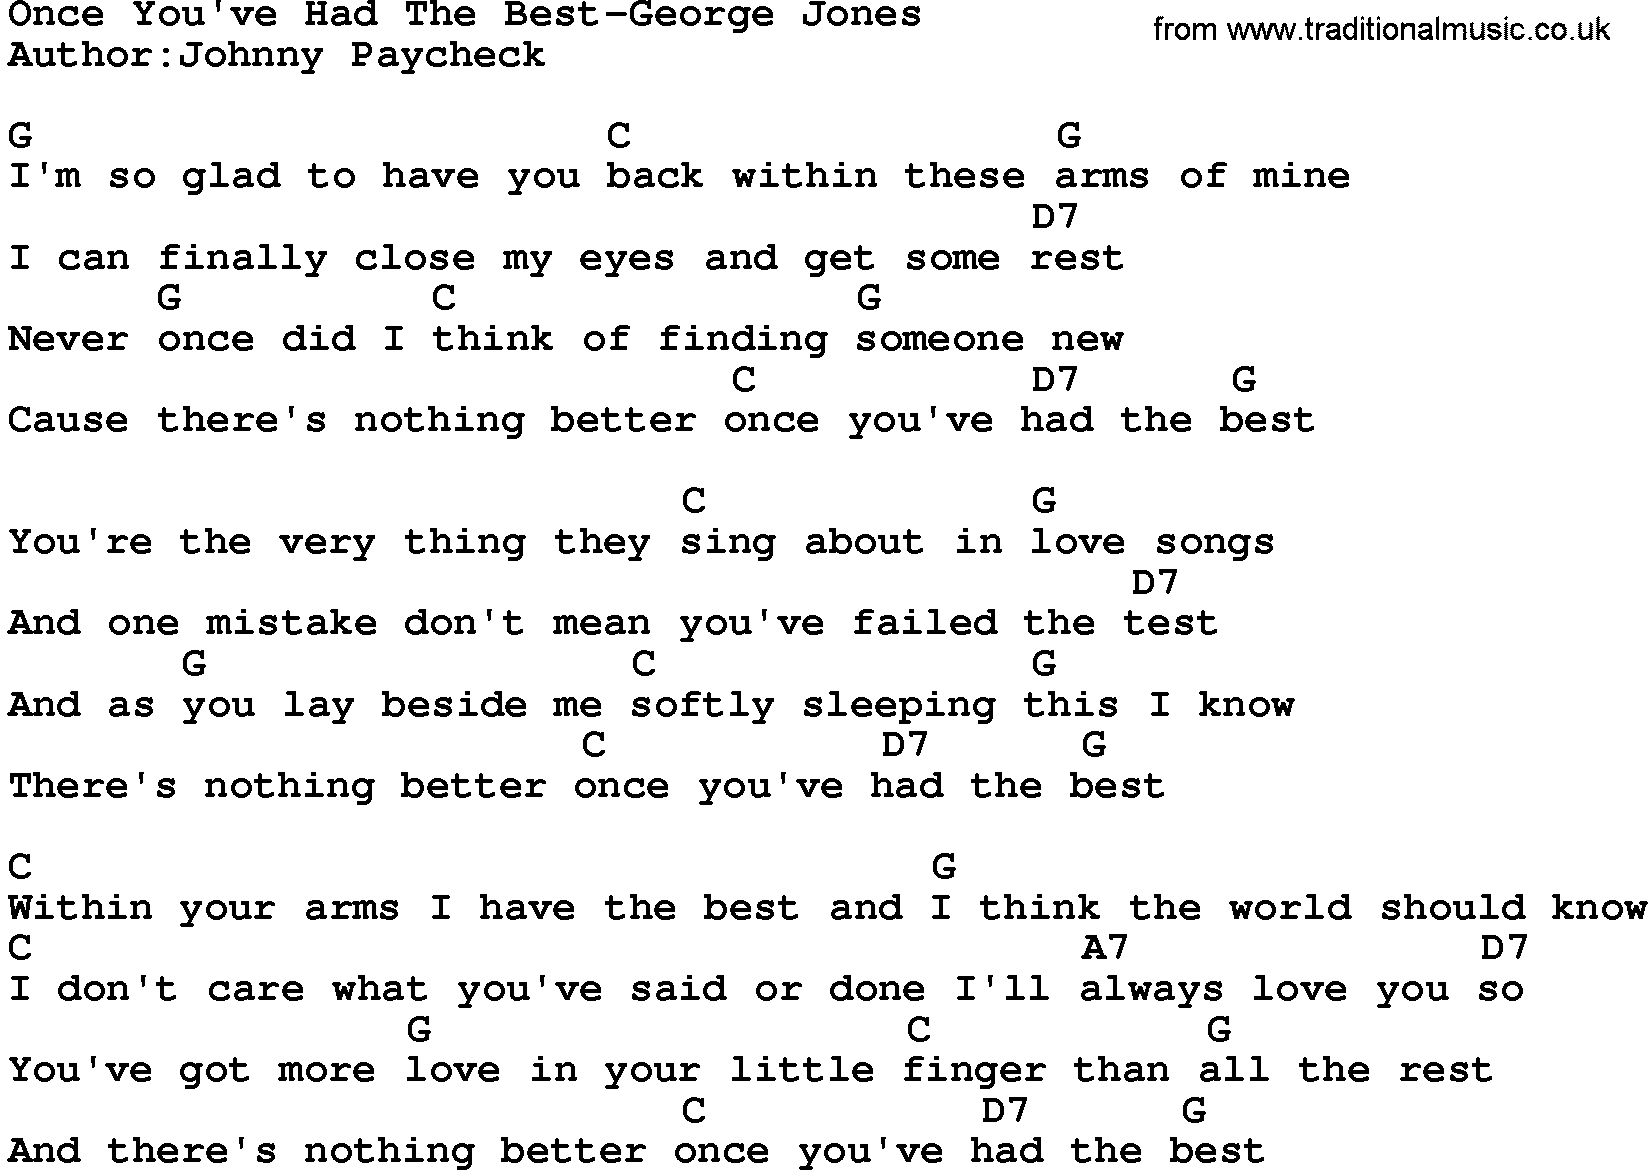 Country music song: Once You've Had The Best-George Jones lyrics and chords